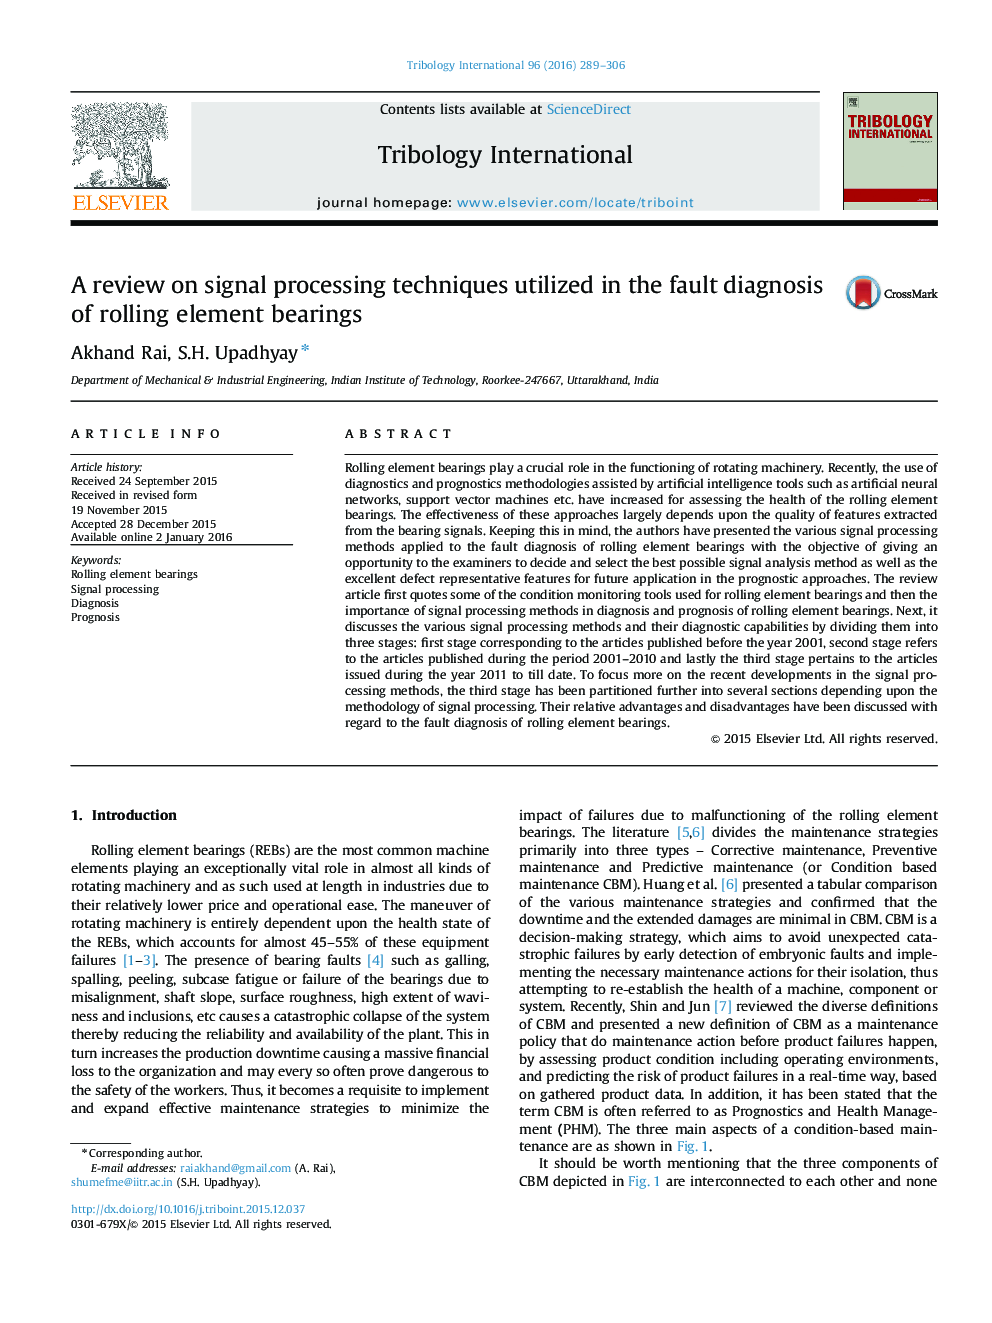 A review on signal processing techniques utilized in the fault diagnosis of rolling element bearings